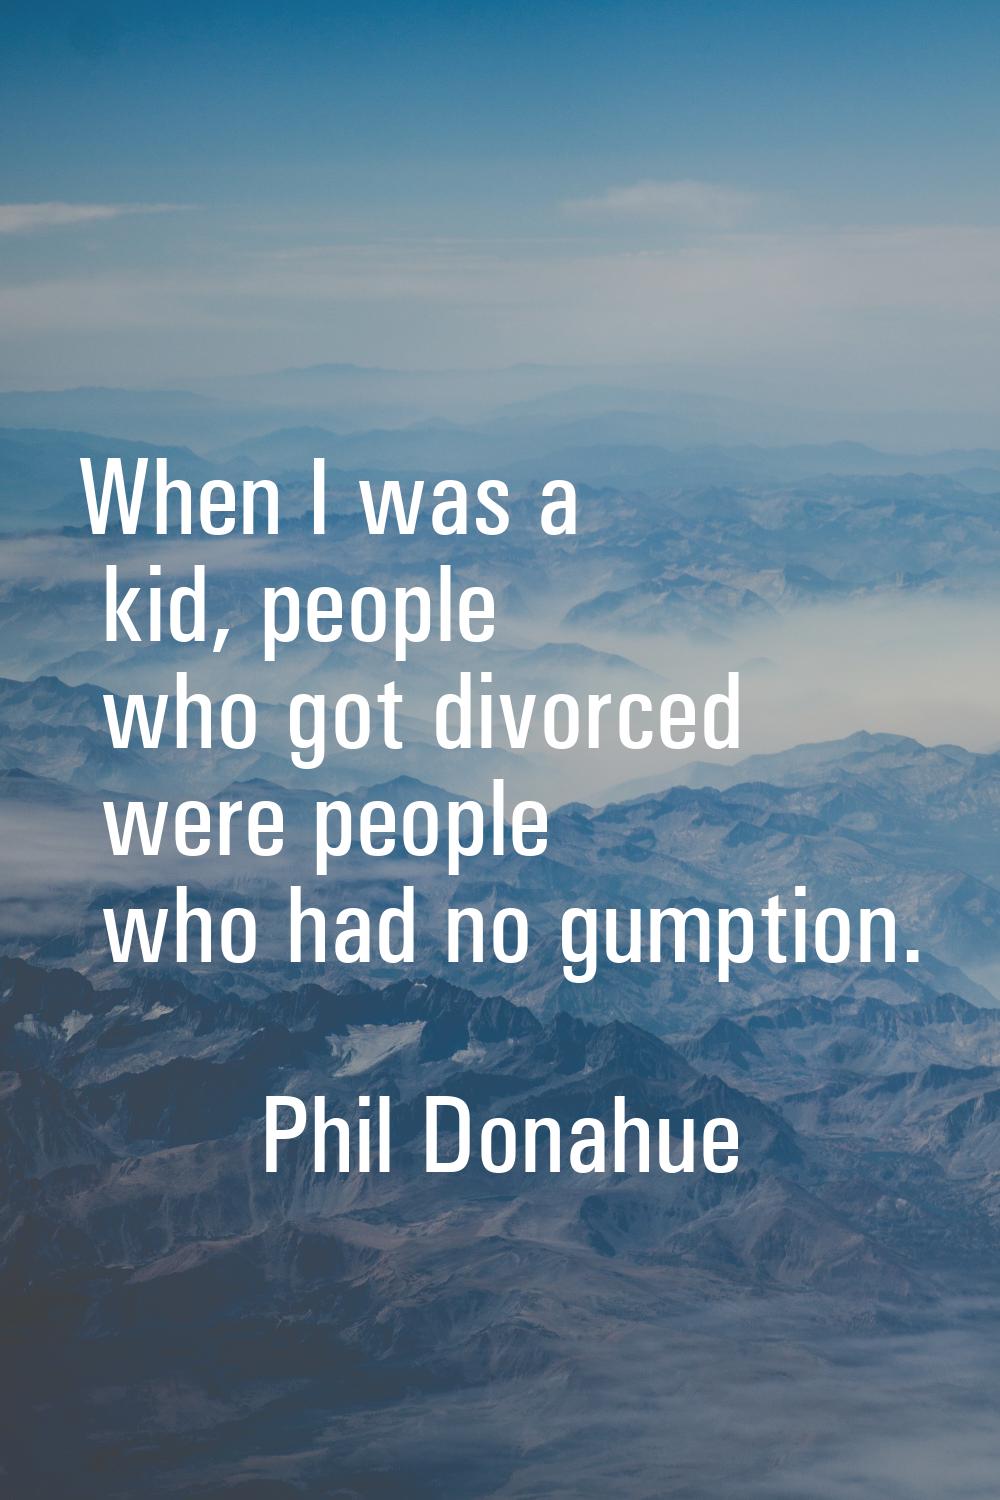 When I was a kid, people who got divorced were people who had no gumption.